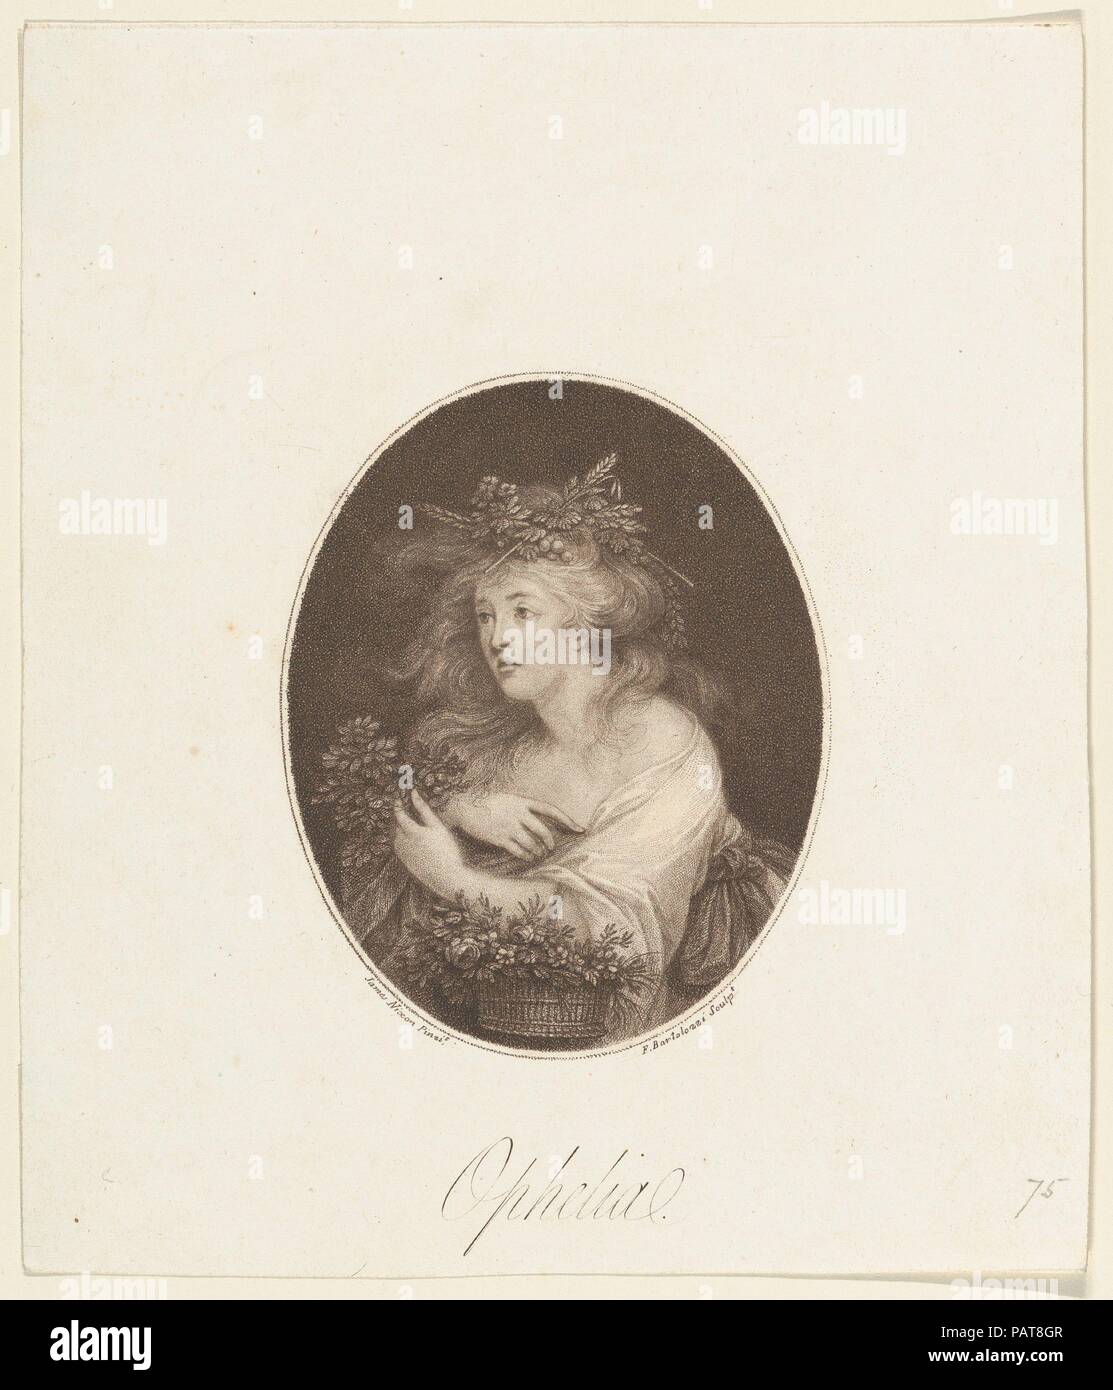 Ophelia (Shakespeare, Hamlet, Act 4). Artist: After James Nixon (British, ca. 1741-1812). Dimensions: oval image: 4 1/2 x 3 5/8 in. (11.4 x 9.2 cm)  sheet: 8 1/4 x 7 in. (21 x 17.8 cm). Engraver: Francesco Bartolozzi (Italian, Florence 1728-1815 Lisbon). Subject: William Shakespeare (British, Stratford-upon-Avon 1564-1616 Stratford-upon-Avon). Date: 1784.  Ophelia appears in act 4 of Shakespeare's play, her mind unhinged by her father's murder. Singing nonsense rhymes, she distributes herbs to the king, queen and her brother then, soon afterward, slips into a stream while picking flowers, and  Stock Photo